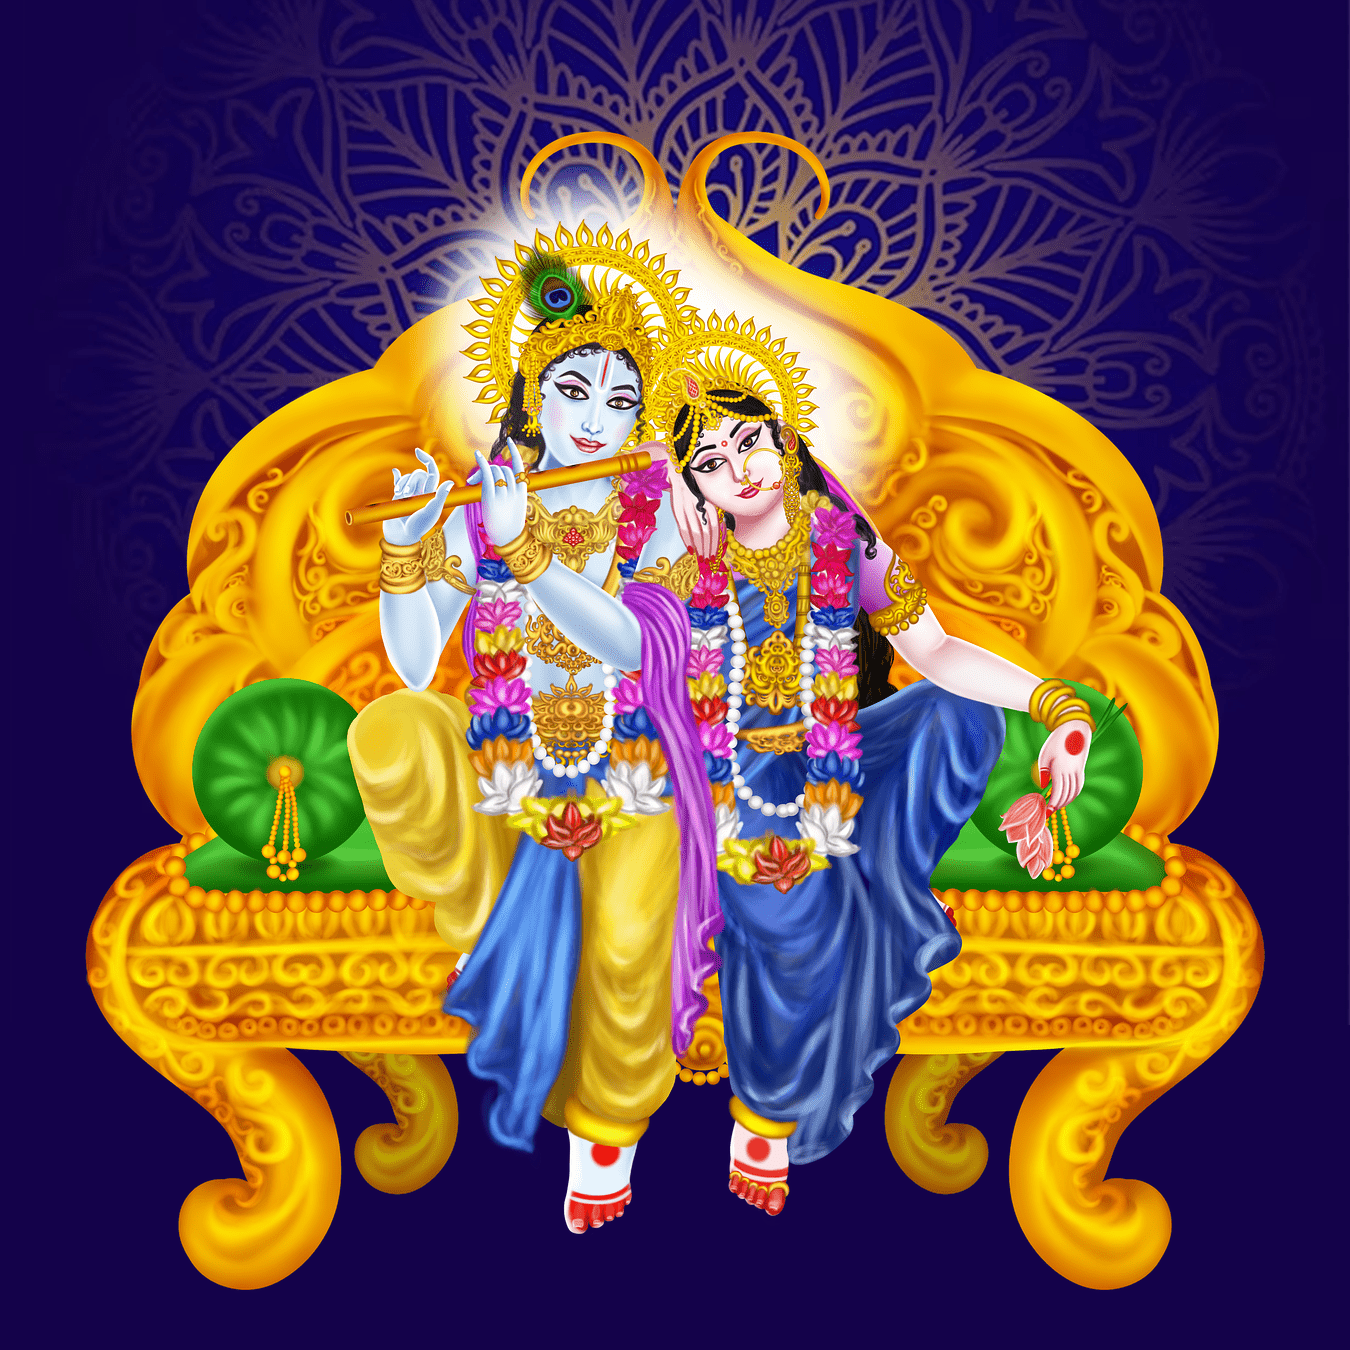 Radha Krishna Images Wallpapers Paintings Pictures Photos 77